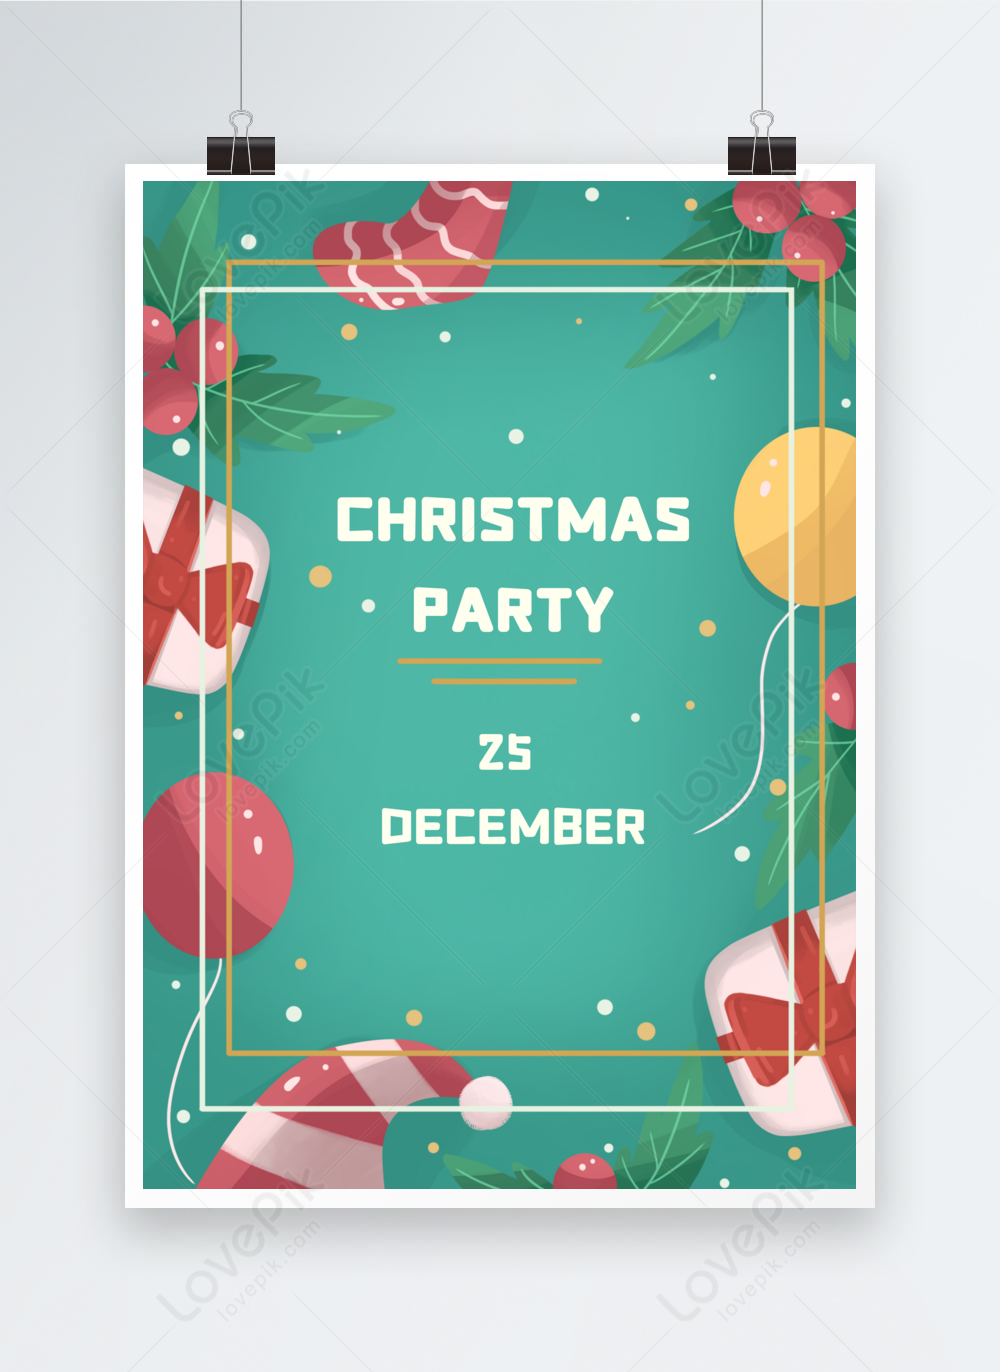 cartoon-poster-of-christmas-party-template-image-picture-free-download